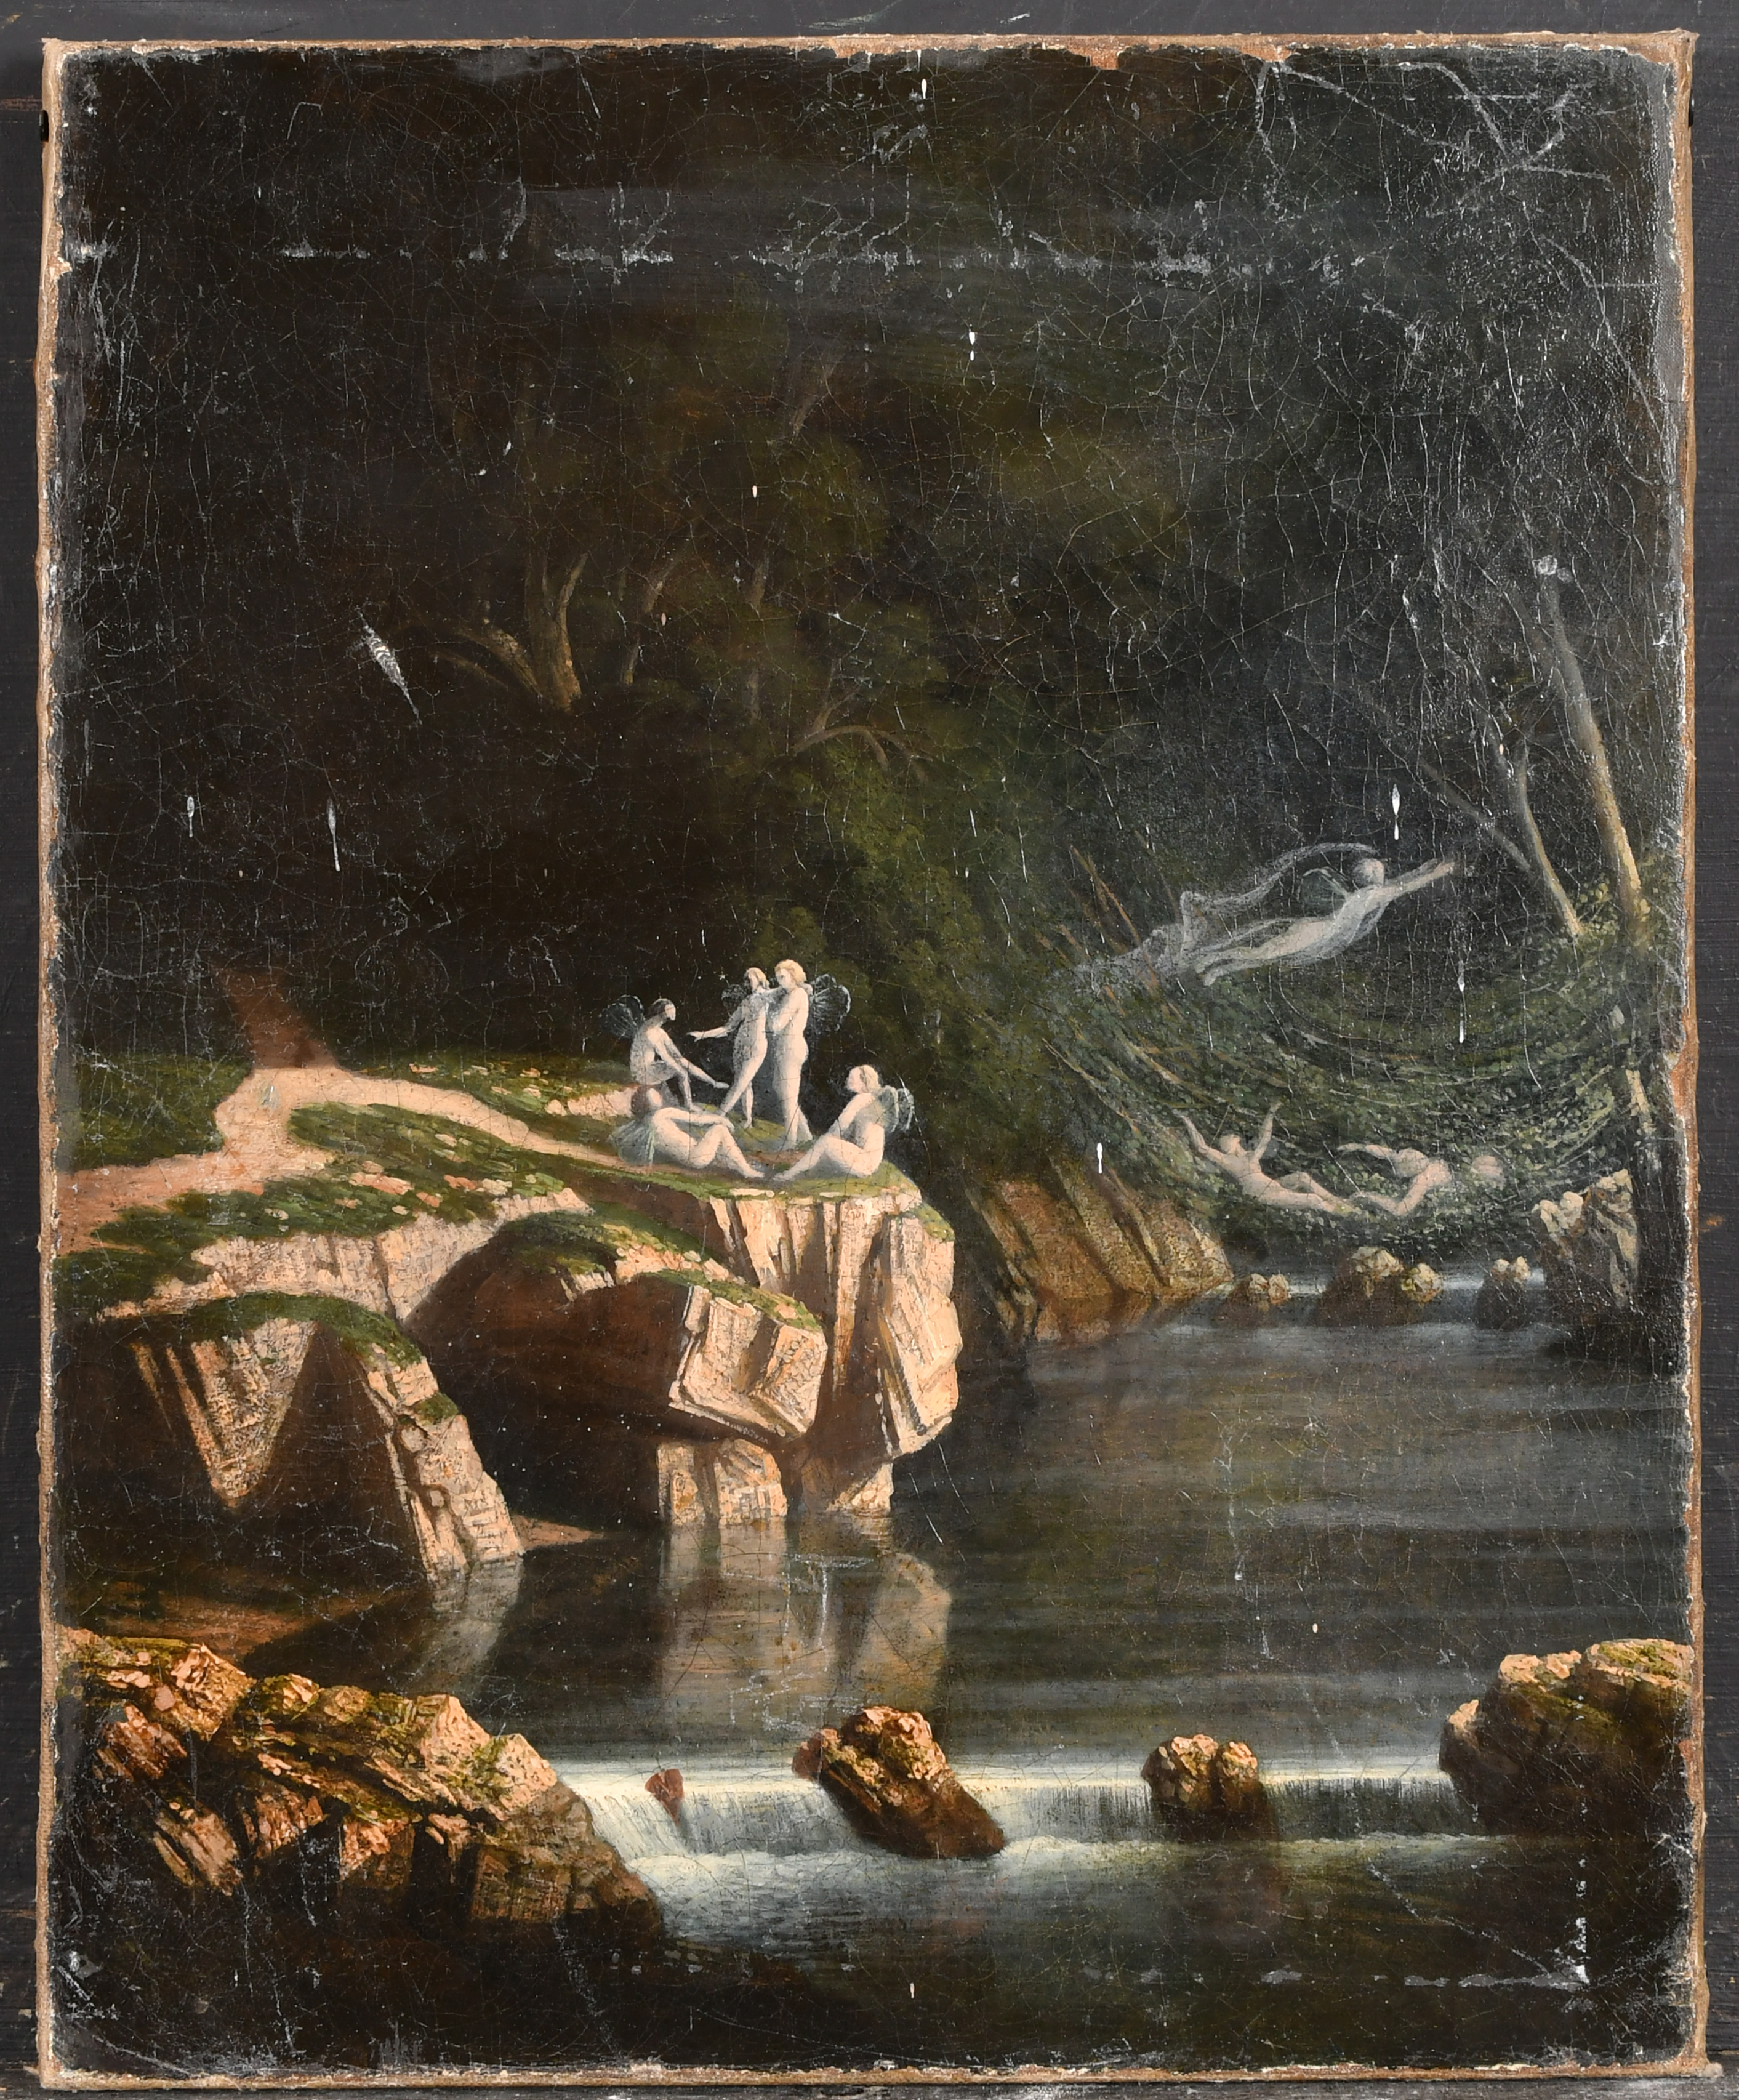 19th Century English School. Fairies in a Fantasy River Landscape, Oil on canvas, unframed 13.5" x - Image 2 of 3